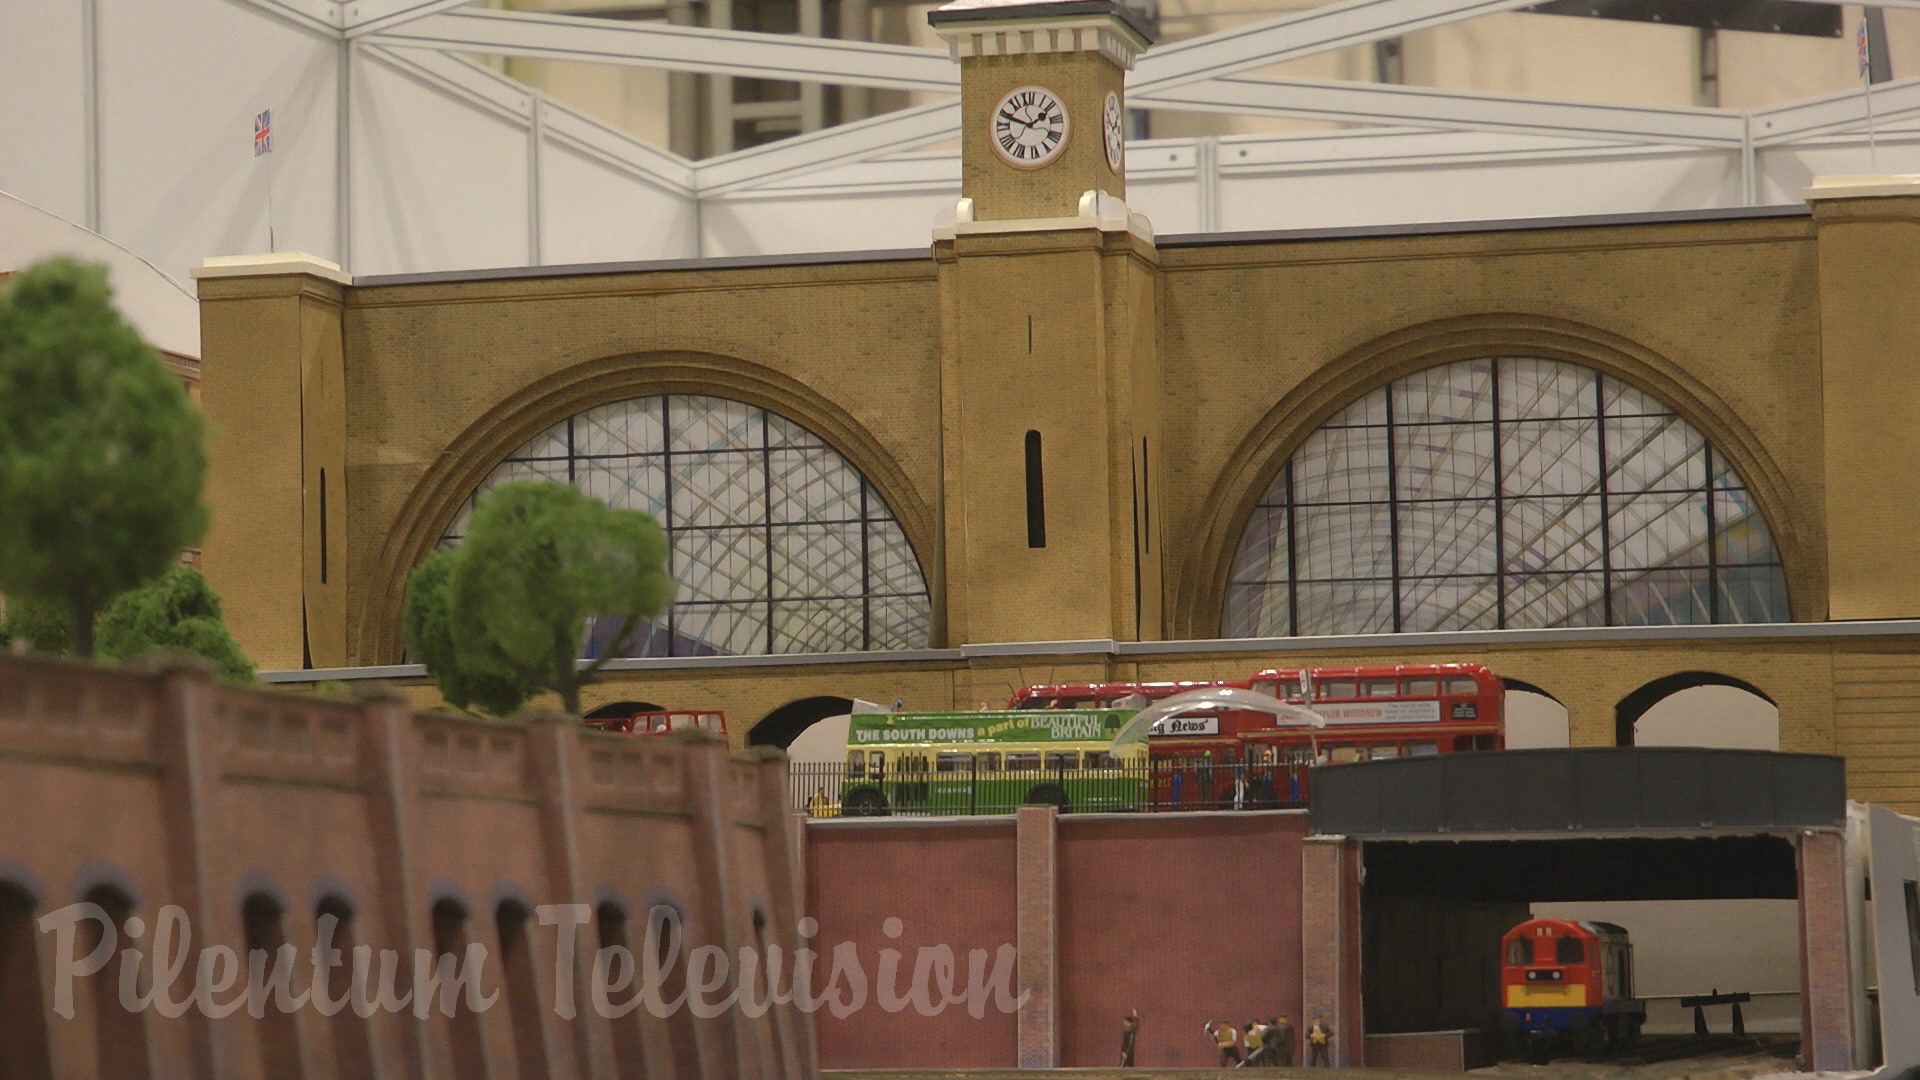 The Great Model Railway Challenge: Railmen of Kent and the London St Pancras and King’s Cross railway station layout are Winners 2019 on Channel 5